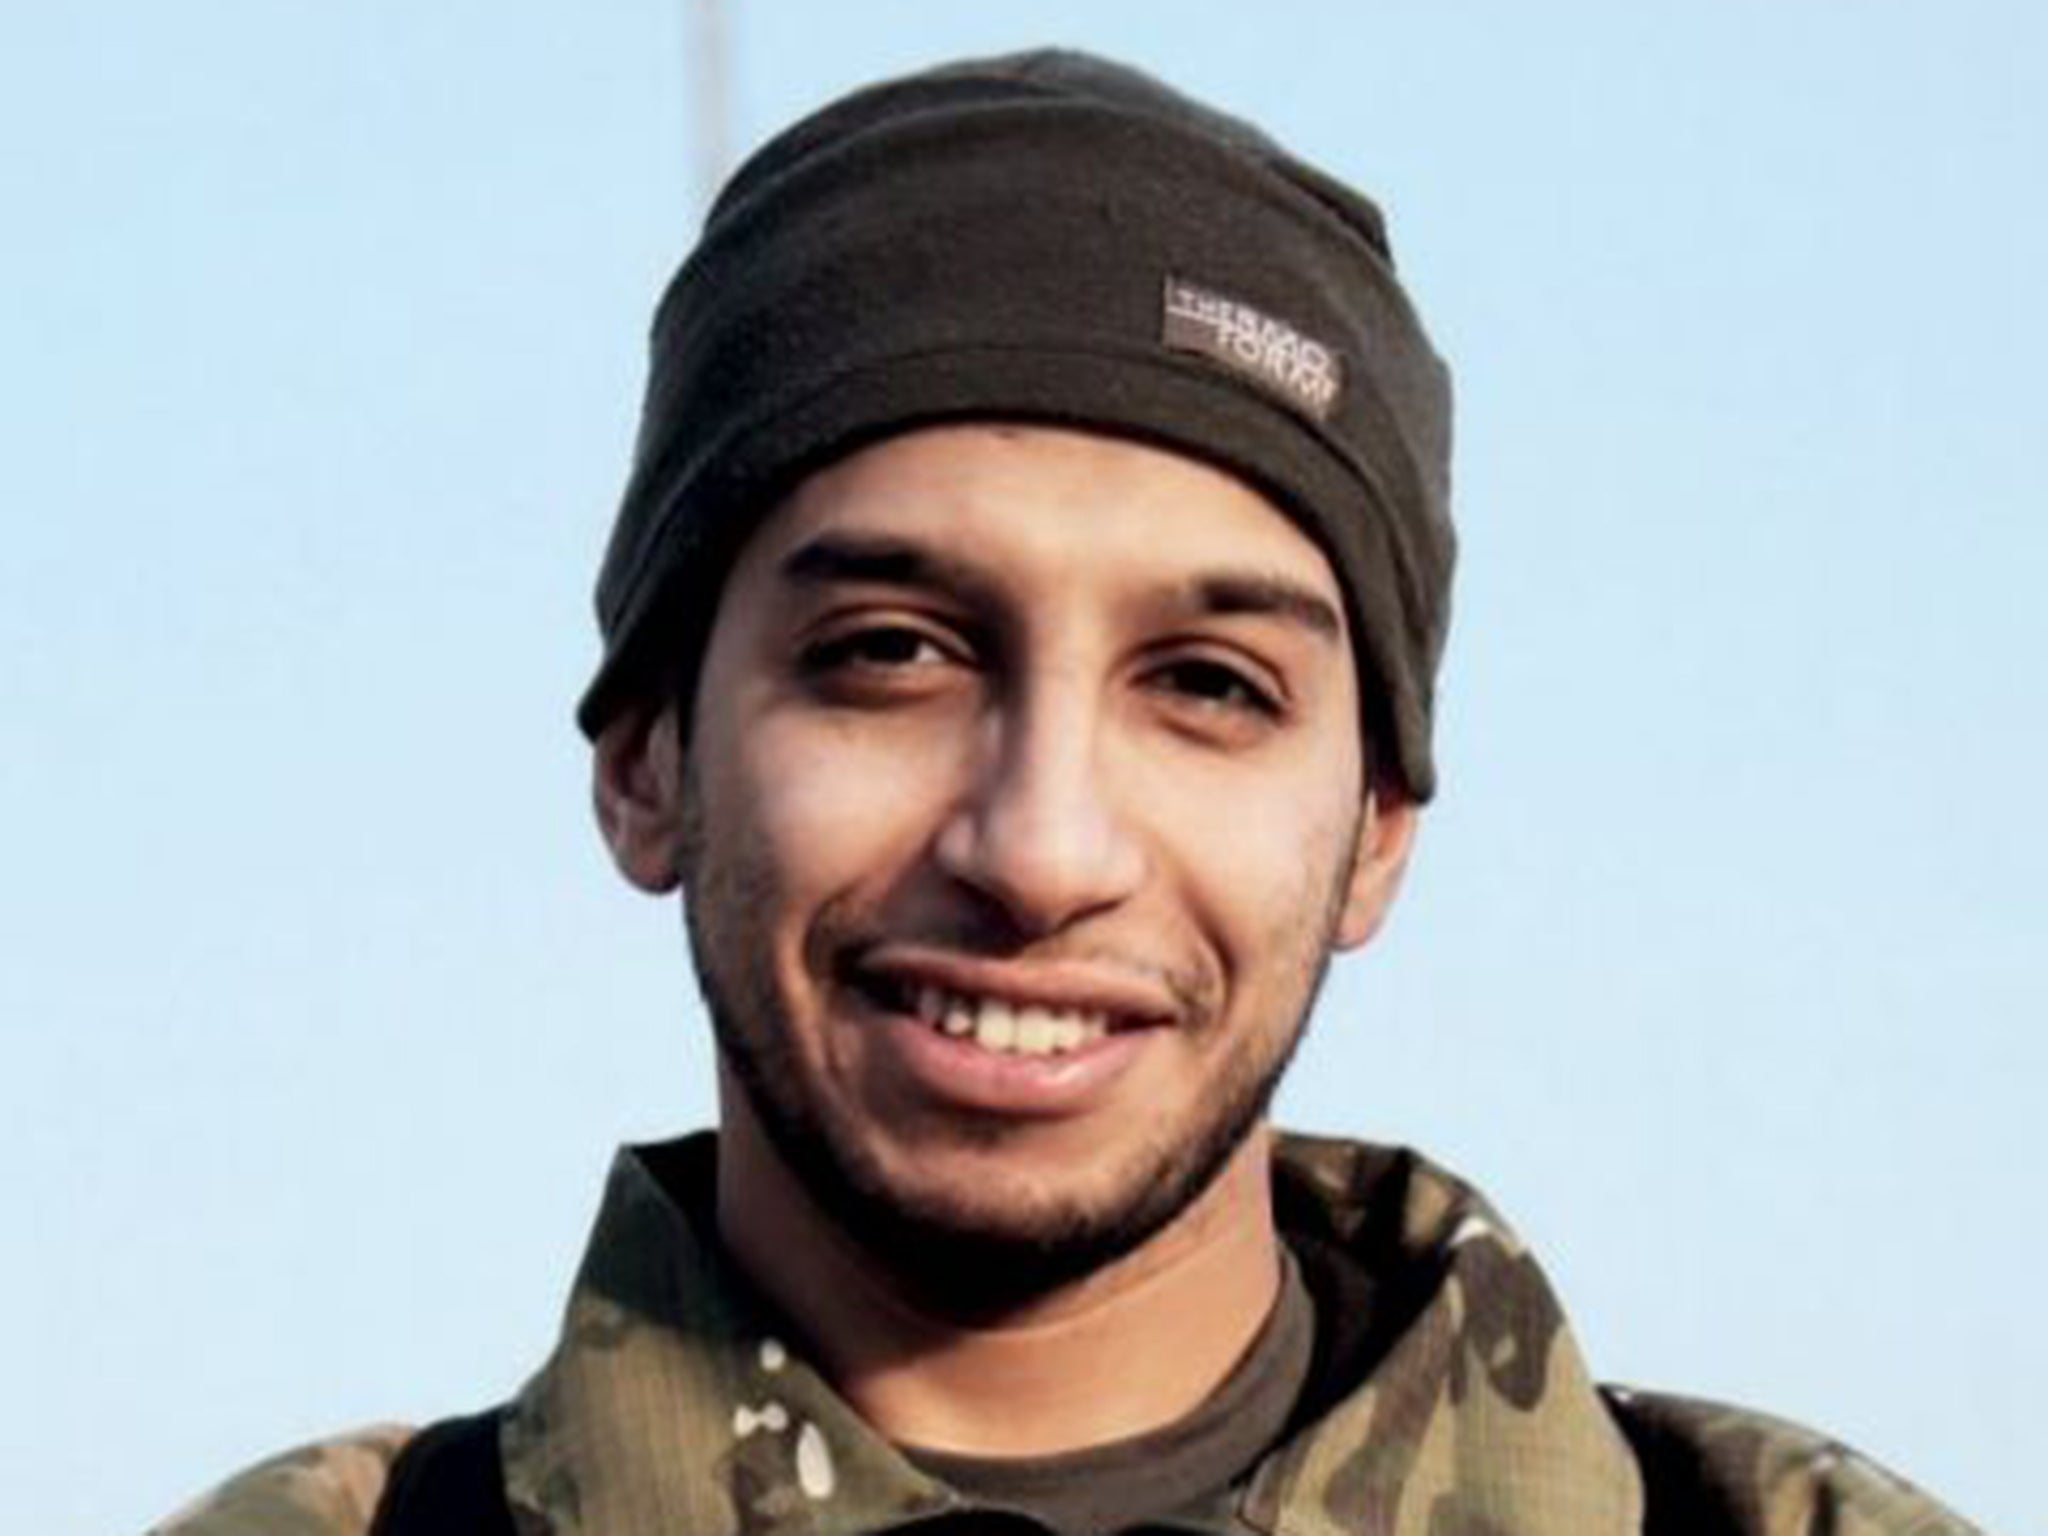 Abdelhamid Abaaoud had been named by officials as the “presumed” mastermind of the attacks